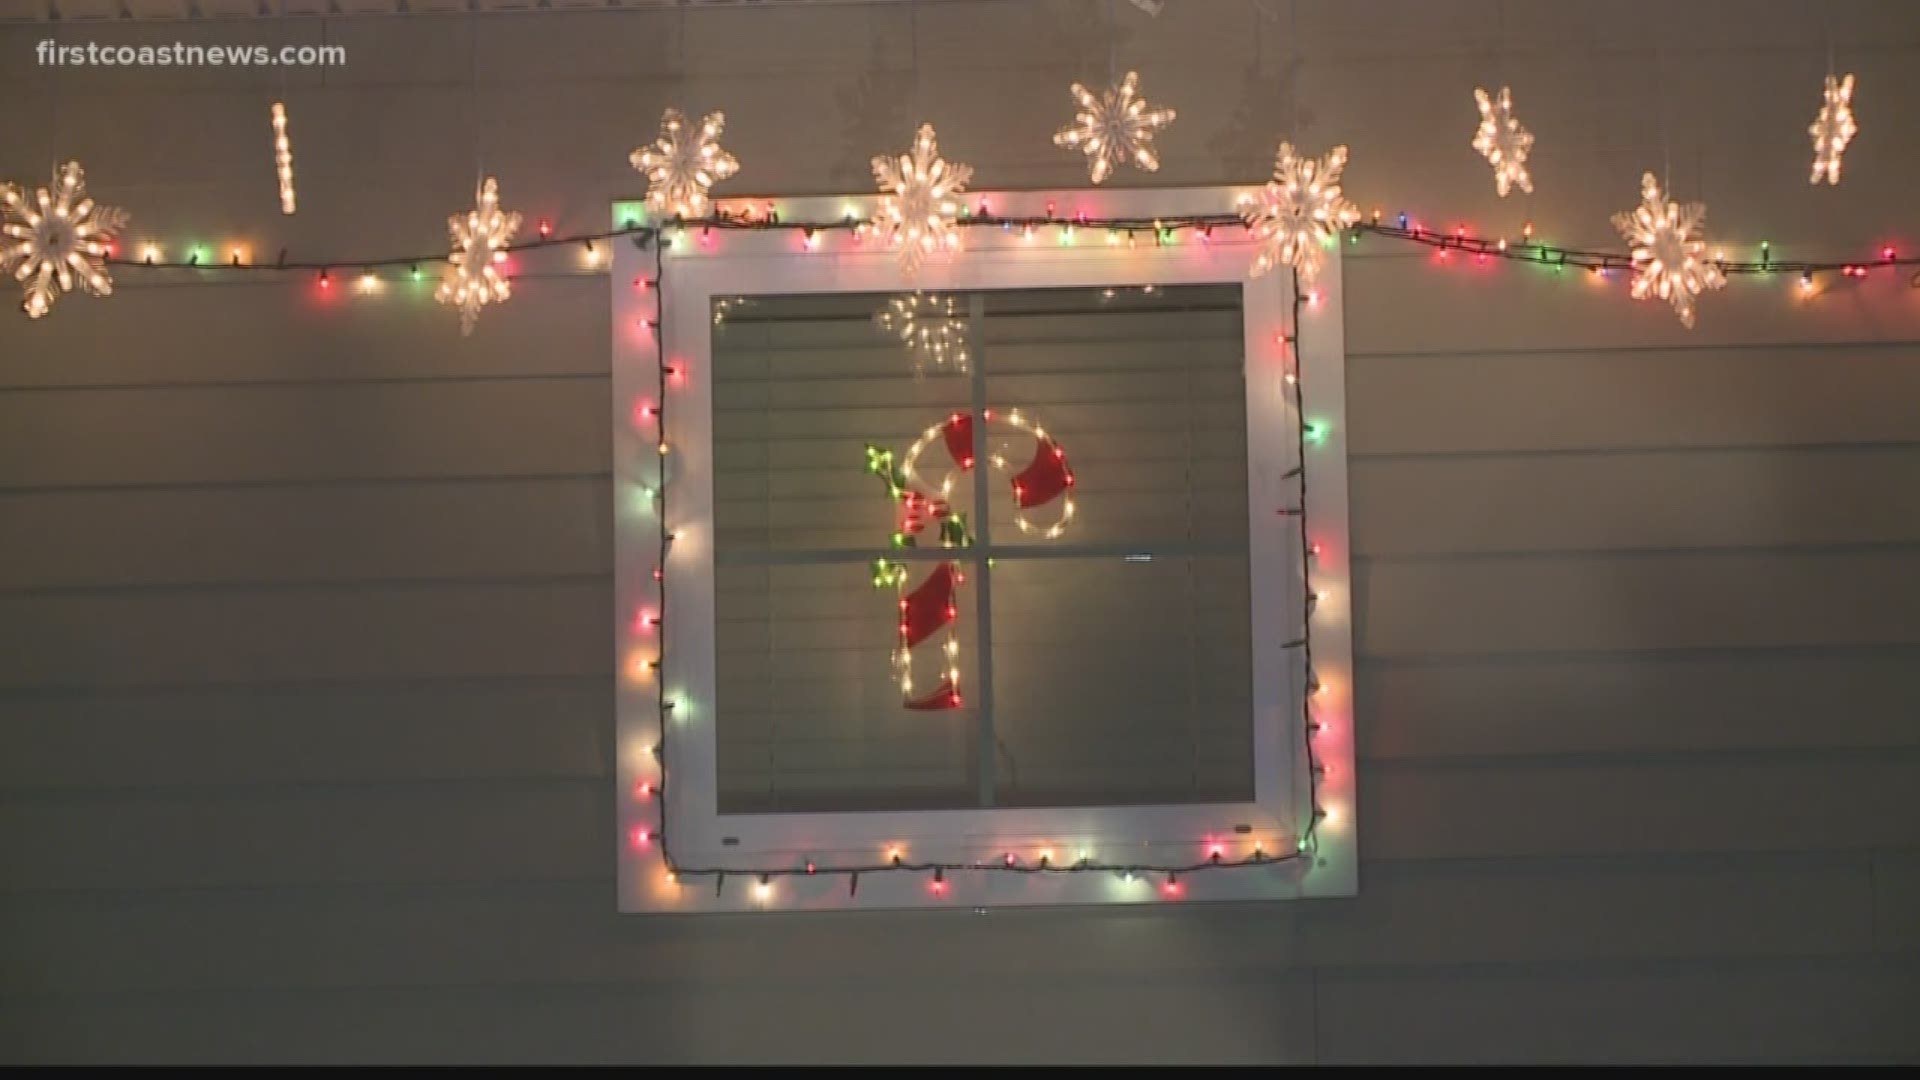 An electronics technician and one very decorative family weigh in on how to show light up the holidays without lighting up your wallet.